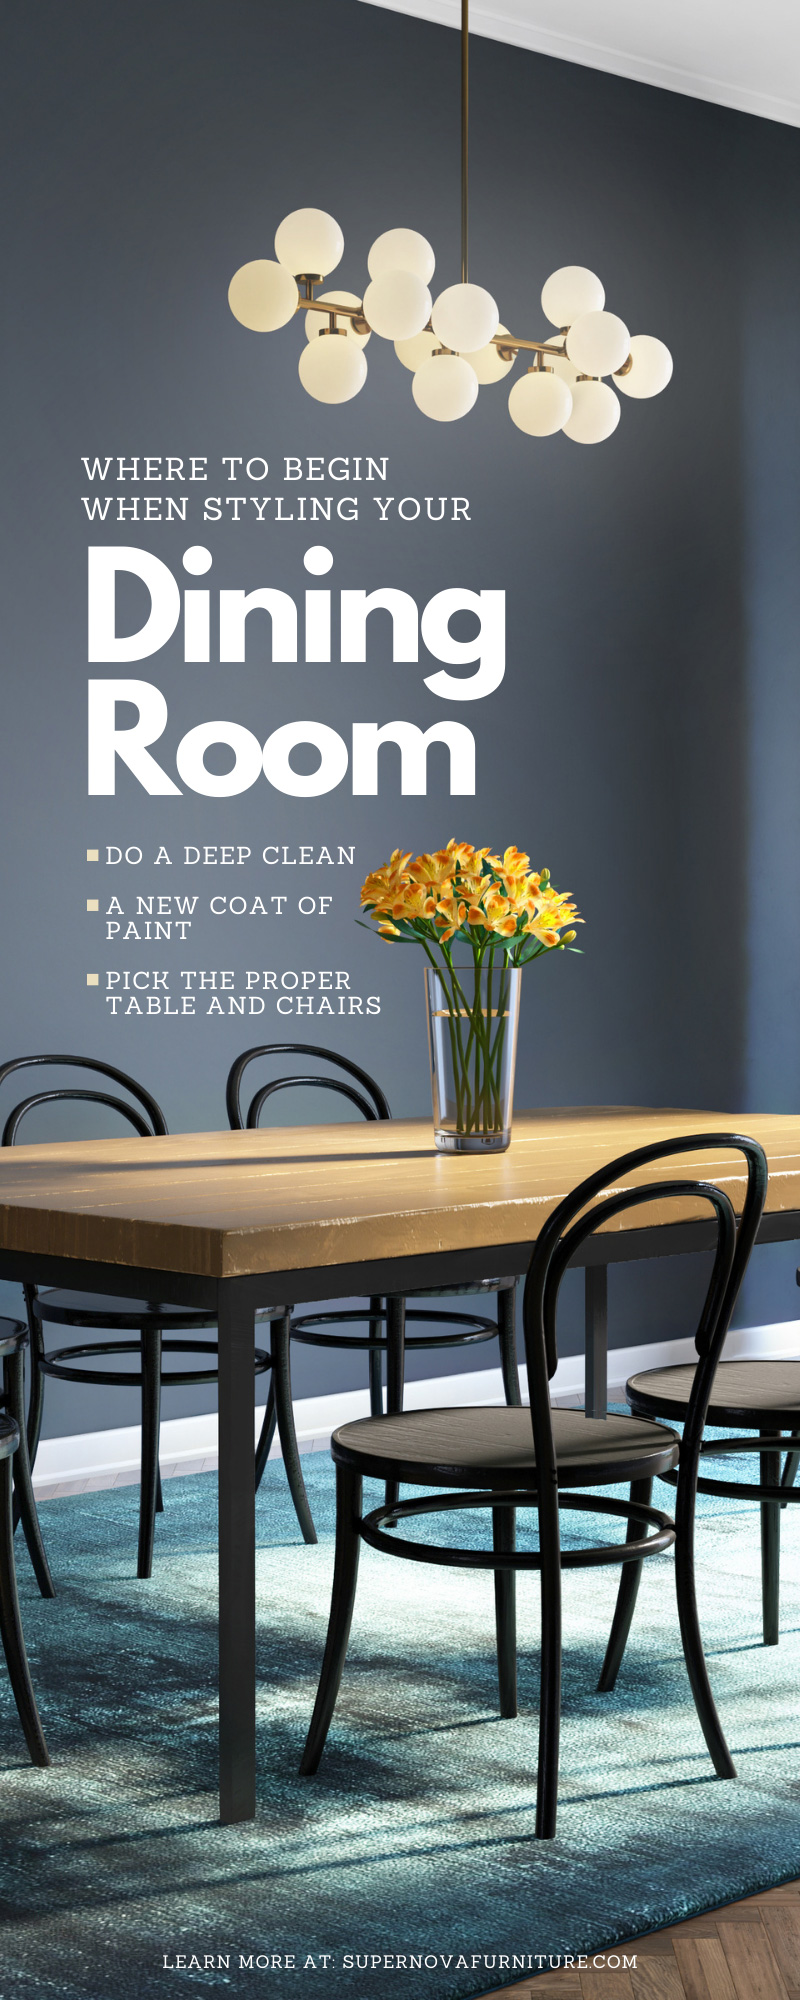 styling a dining room